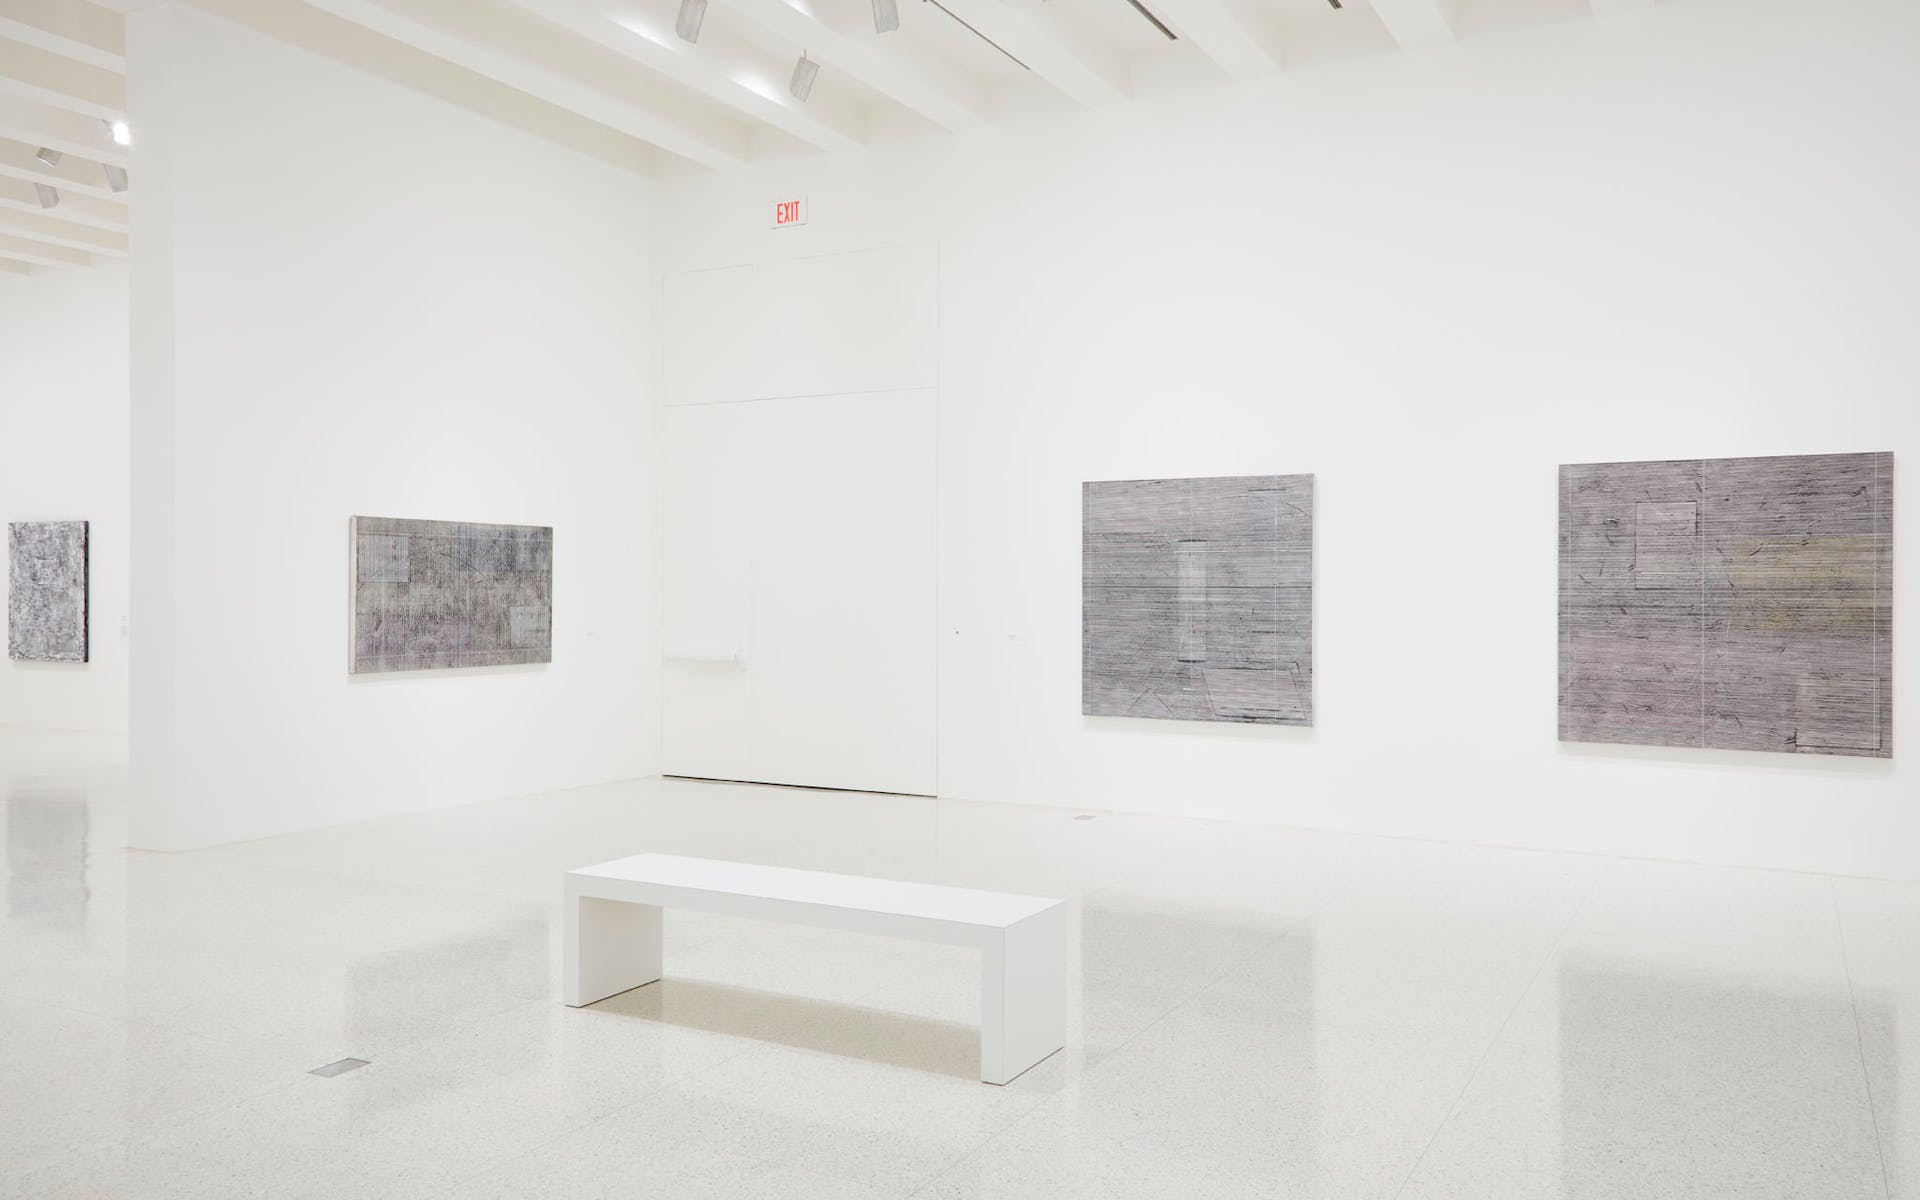 View of the exhibition Jack Whitten: Five Decades of Painting, 2015